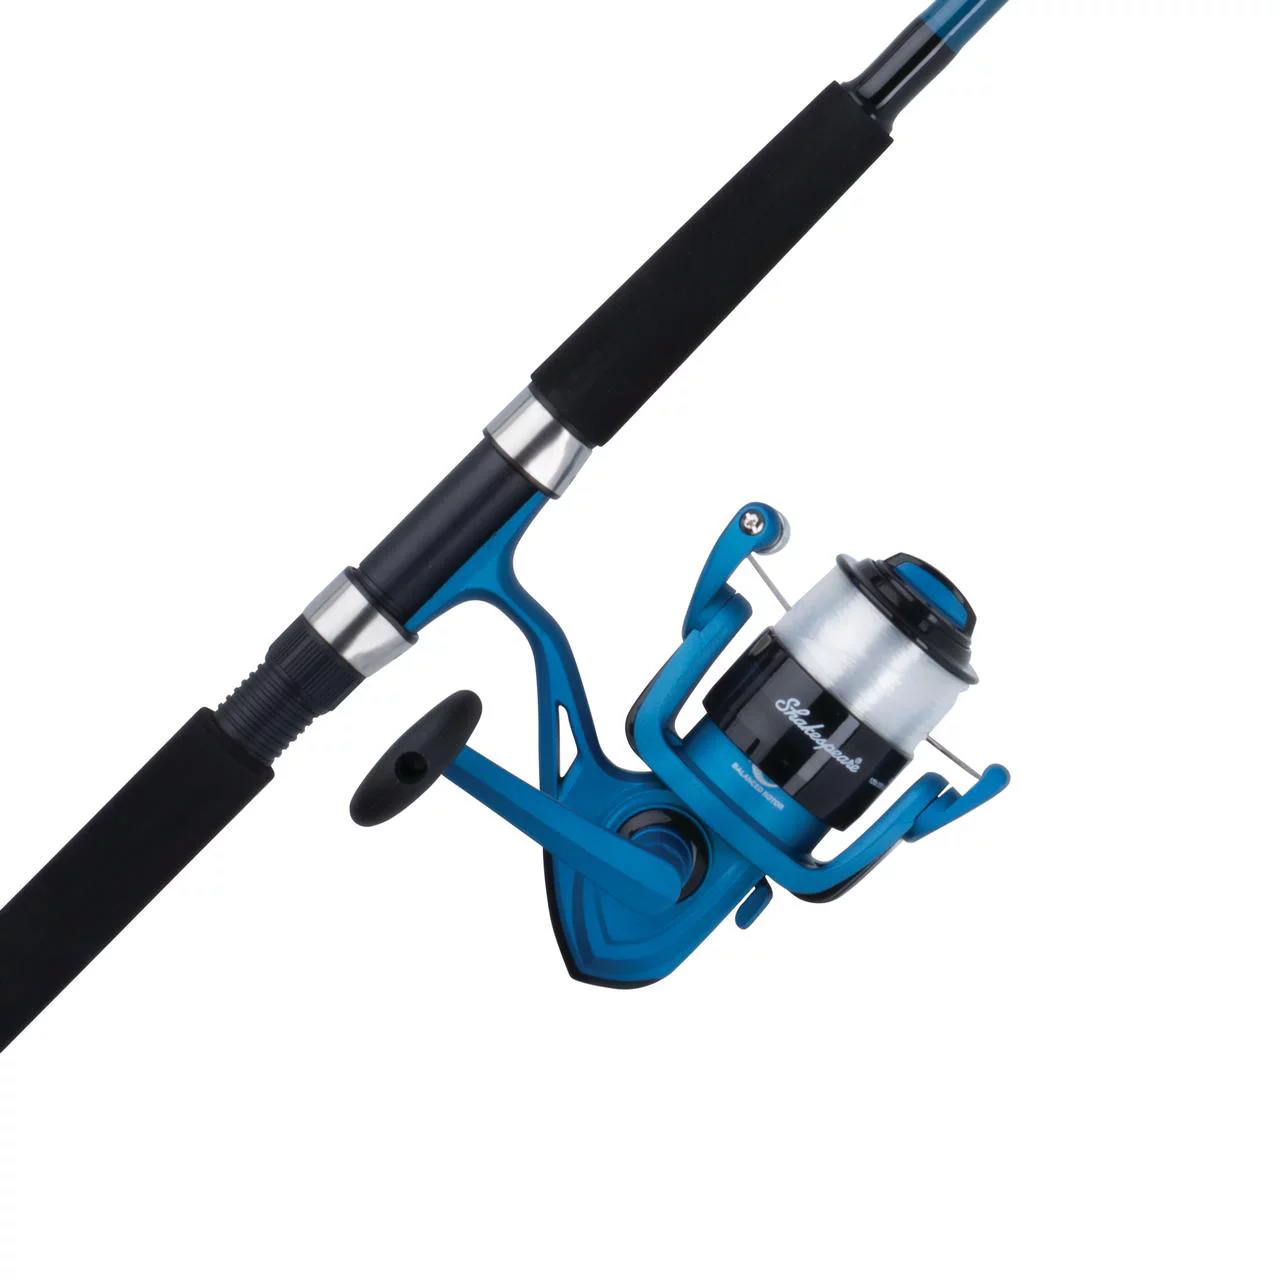 Shakespeare Tiger 7 Spinning Rod and Reel Combo